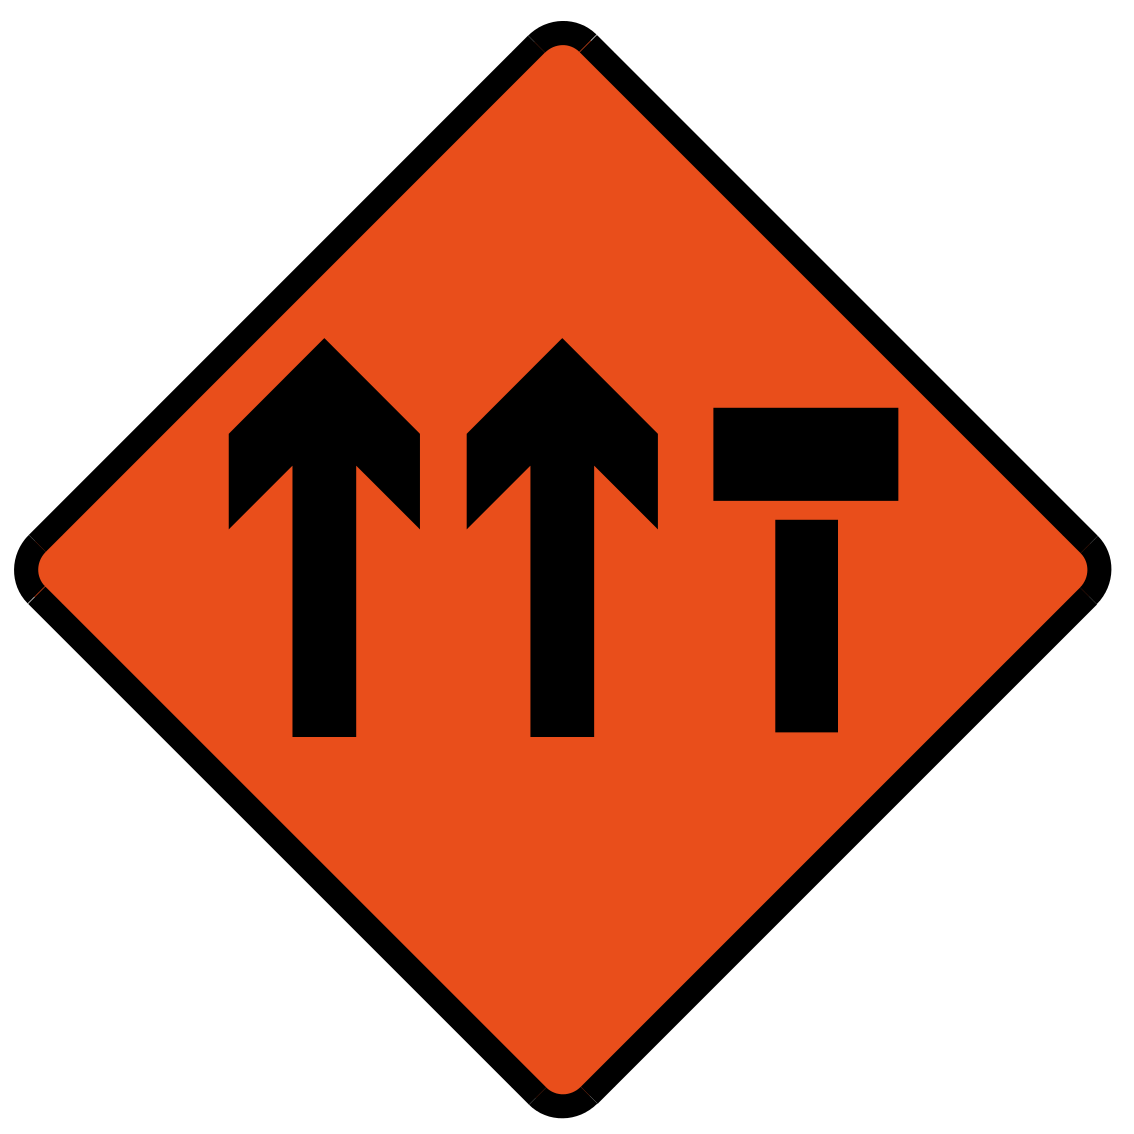 Layout of lanes ahead 